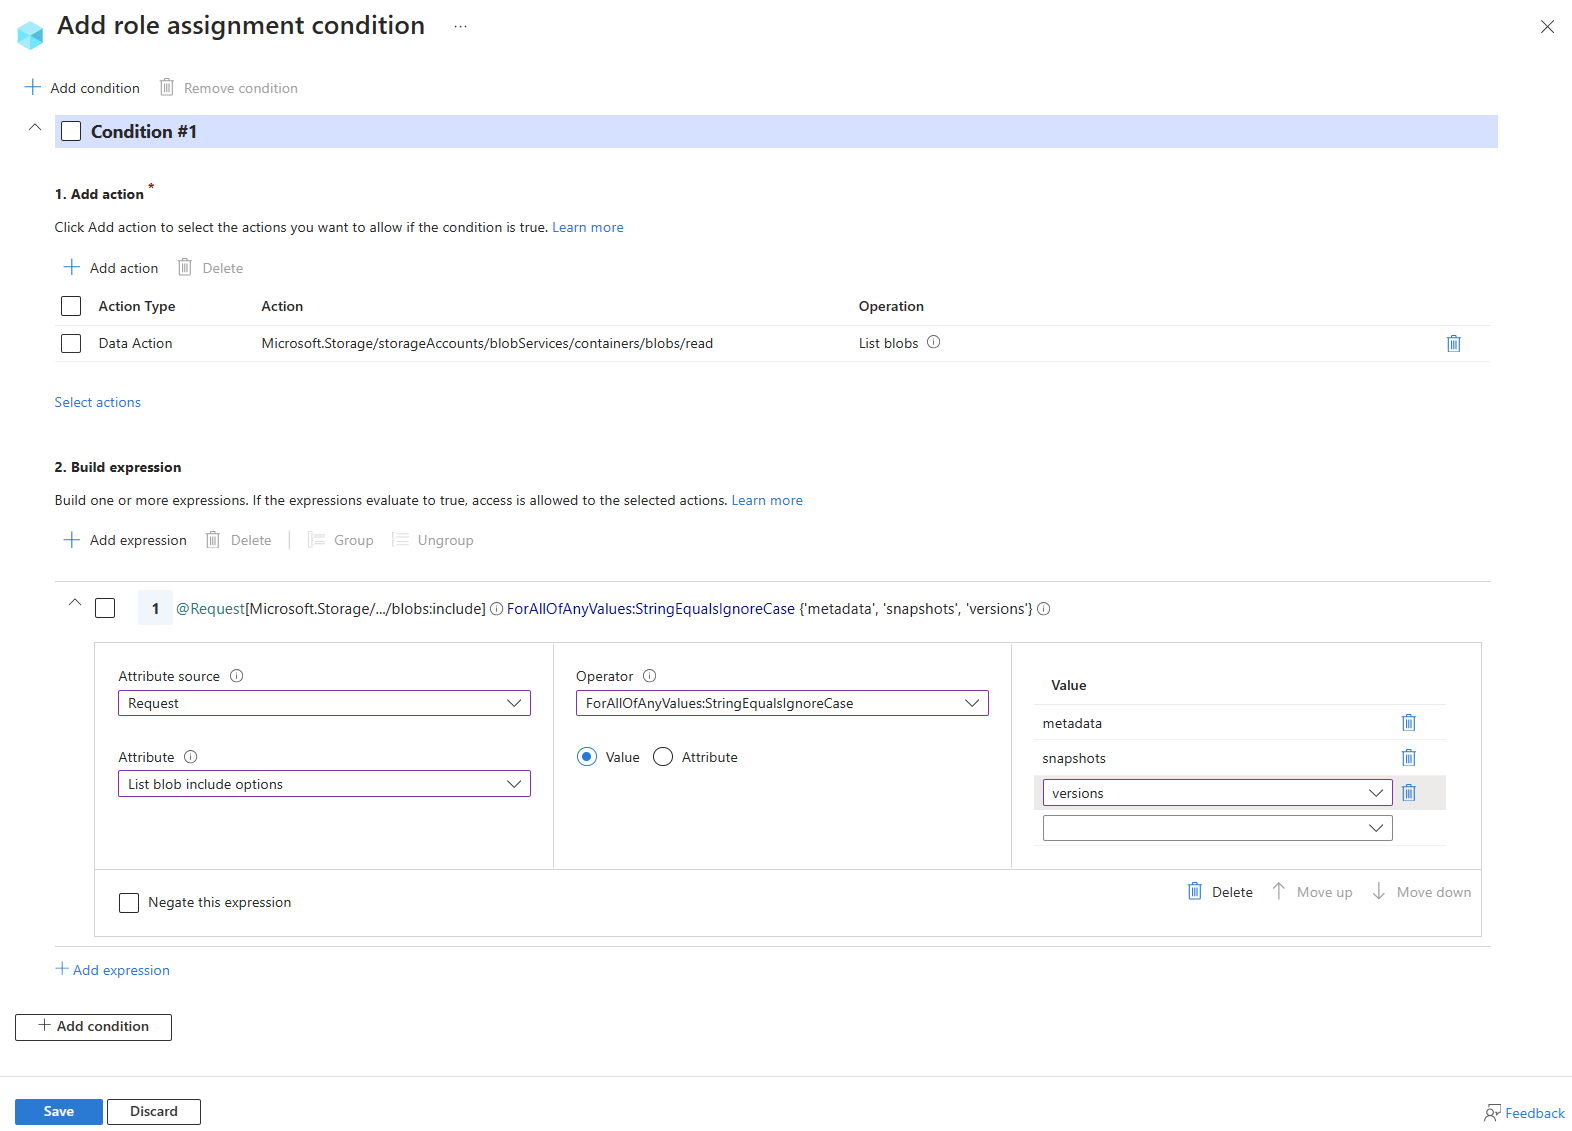 Screenshot of condition editor in Azure portal showing a condition to allow a user to list blobs in a container and include metadata, snapshot, and version information.